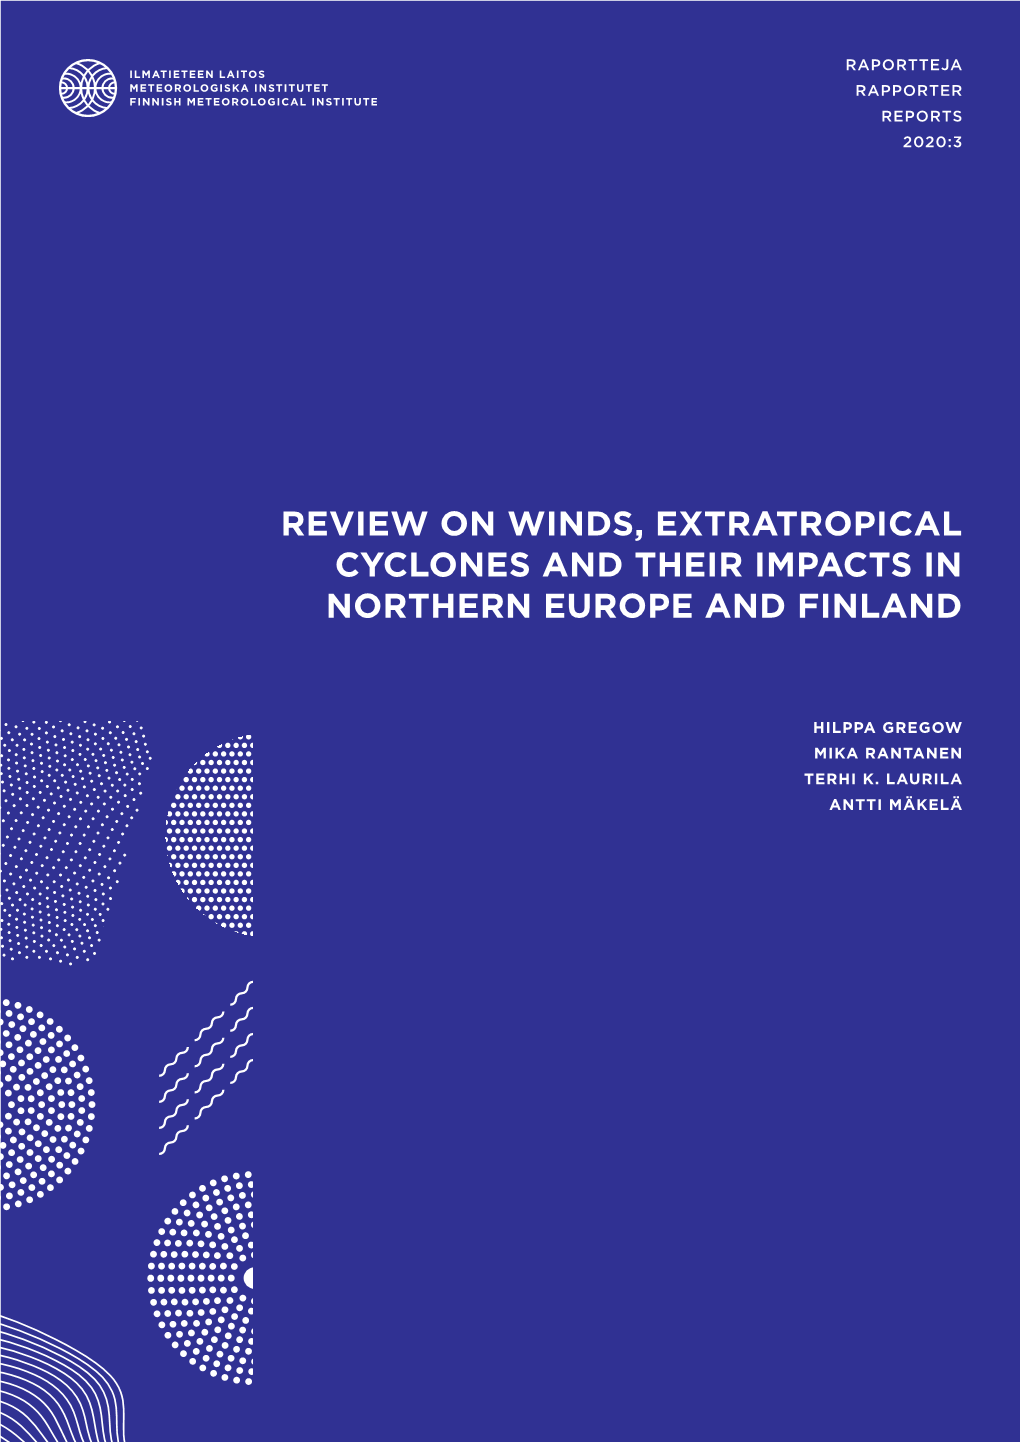 Review on Winds, Extratropical Cyclones and Their Impacts in Northern Europe and Finland